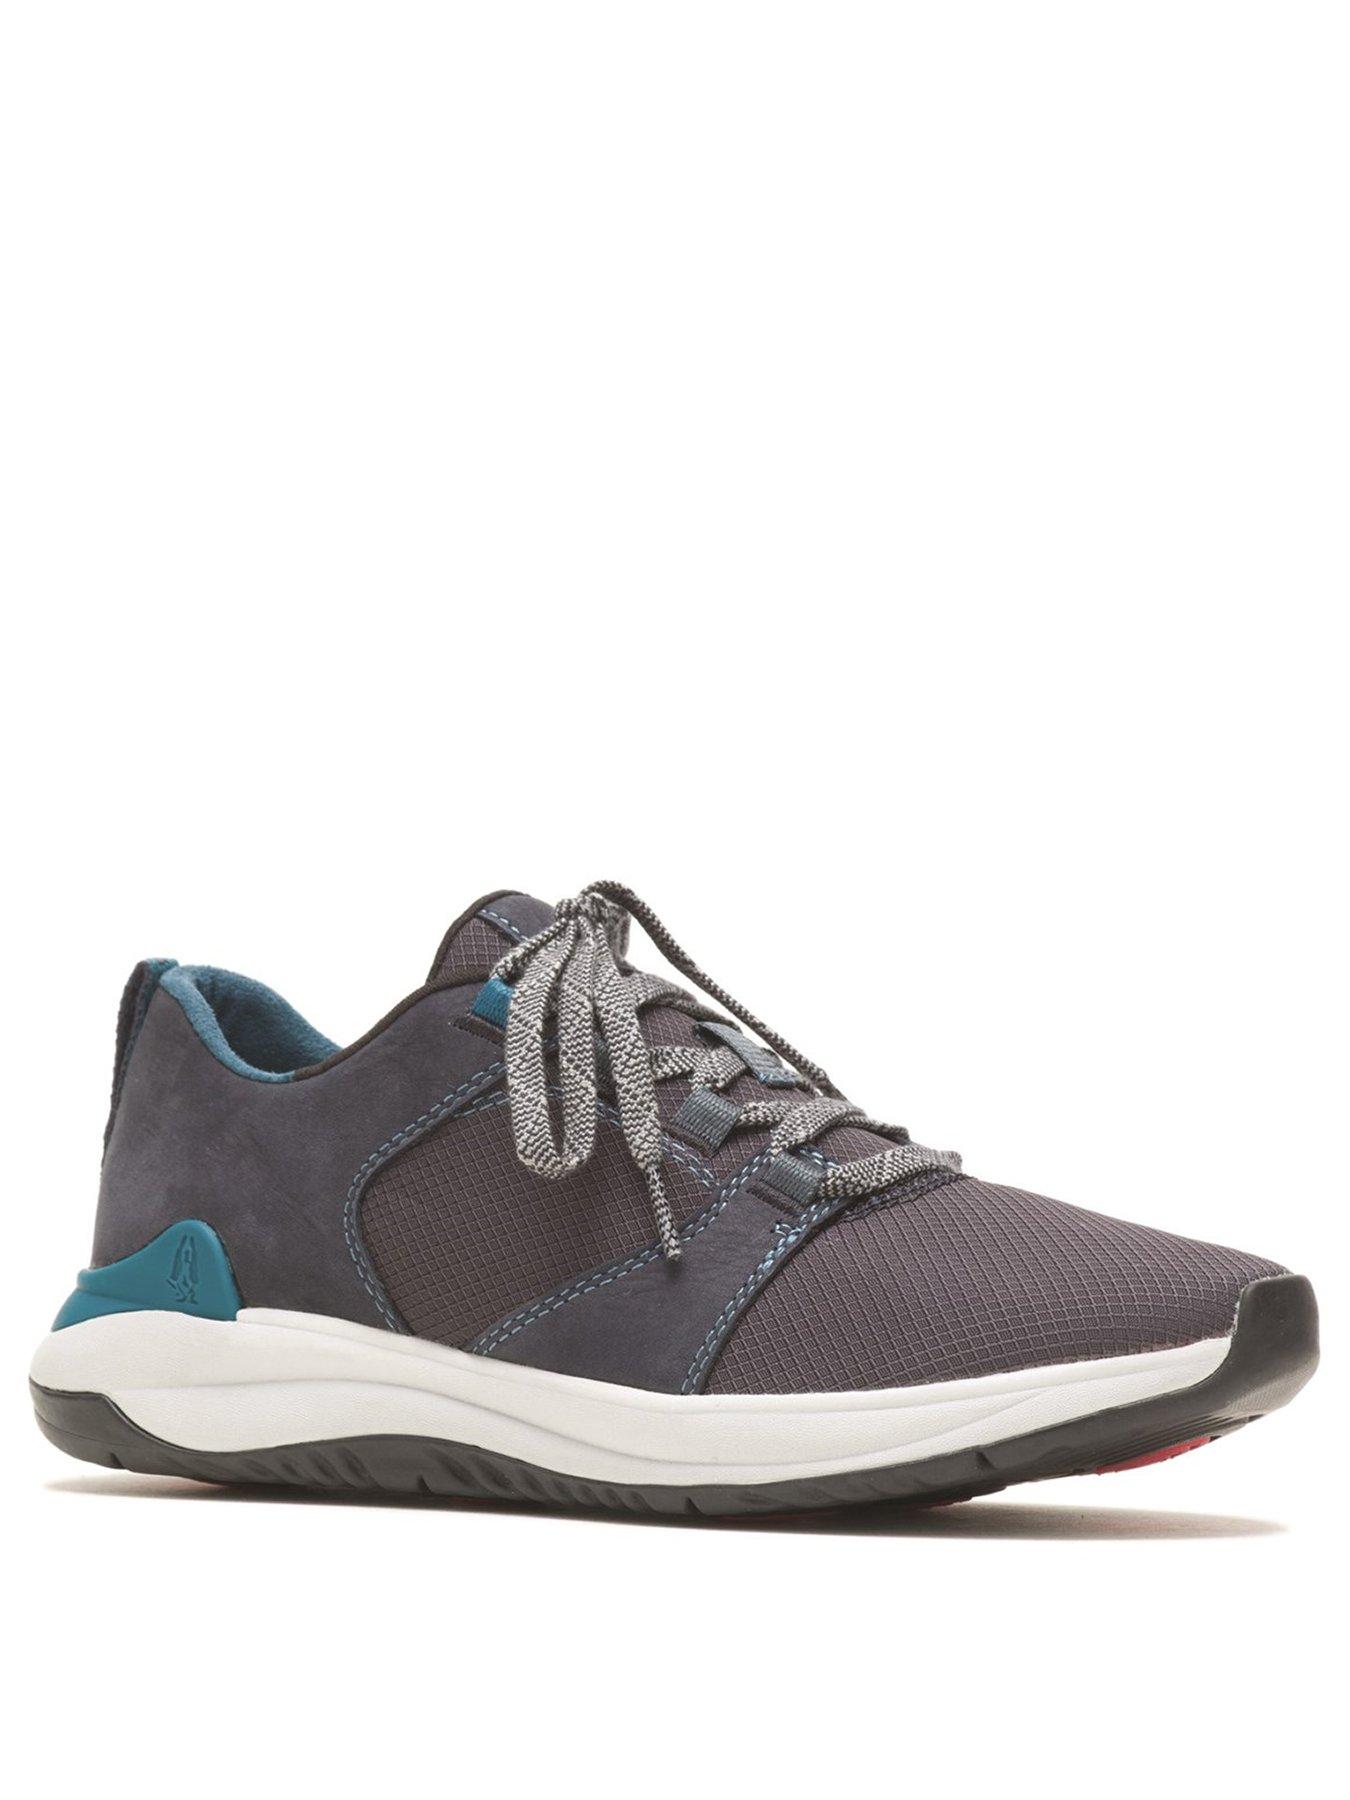 Trainers Basil Pt Lace Up Trainer - Navy